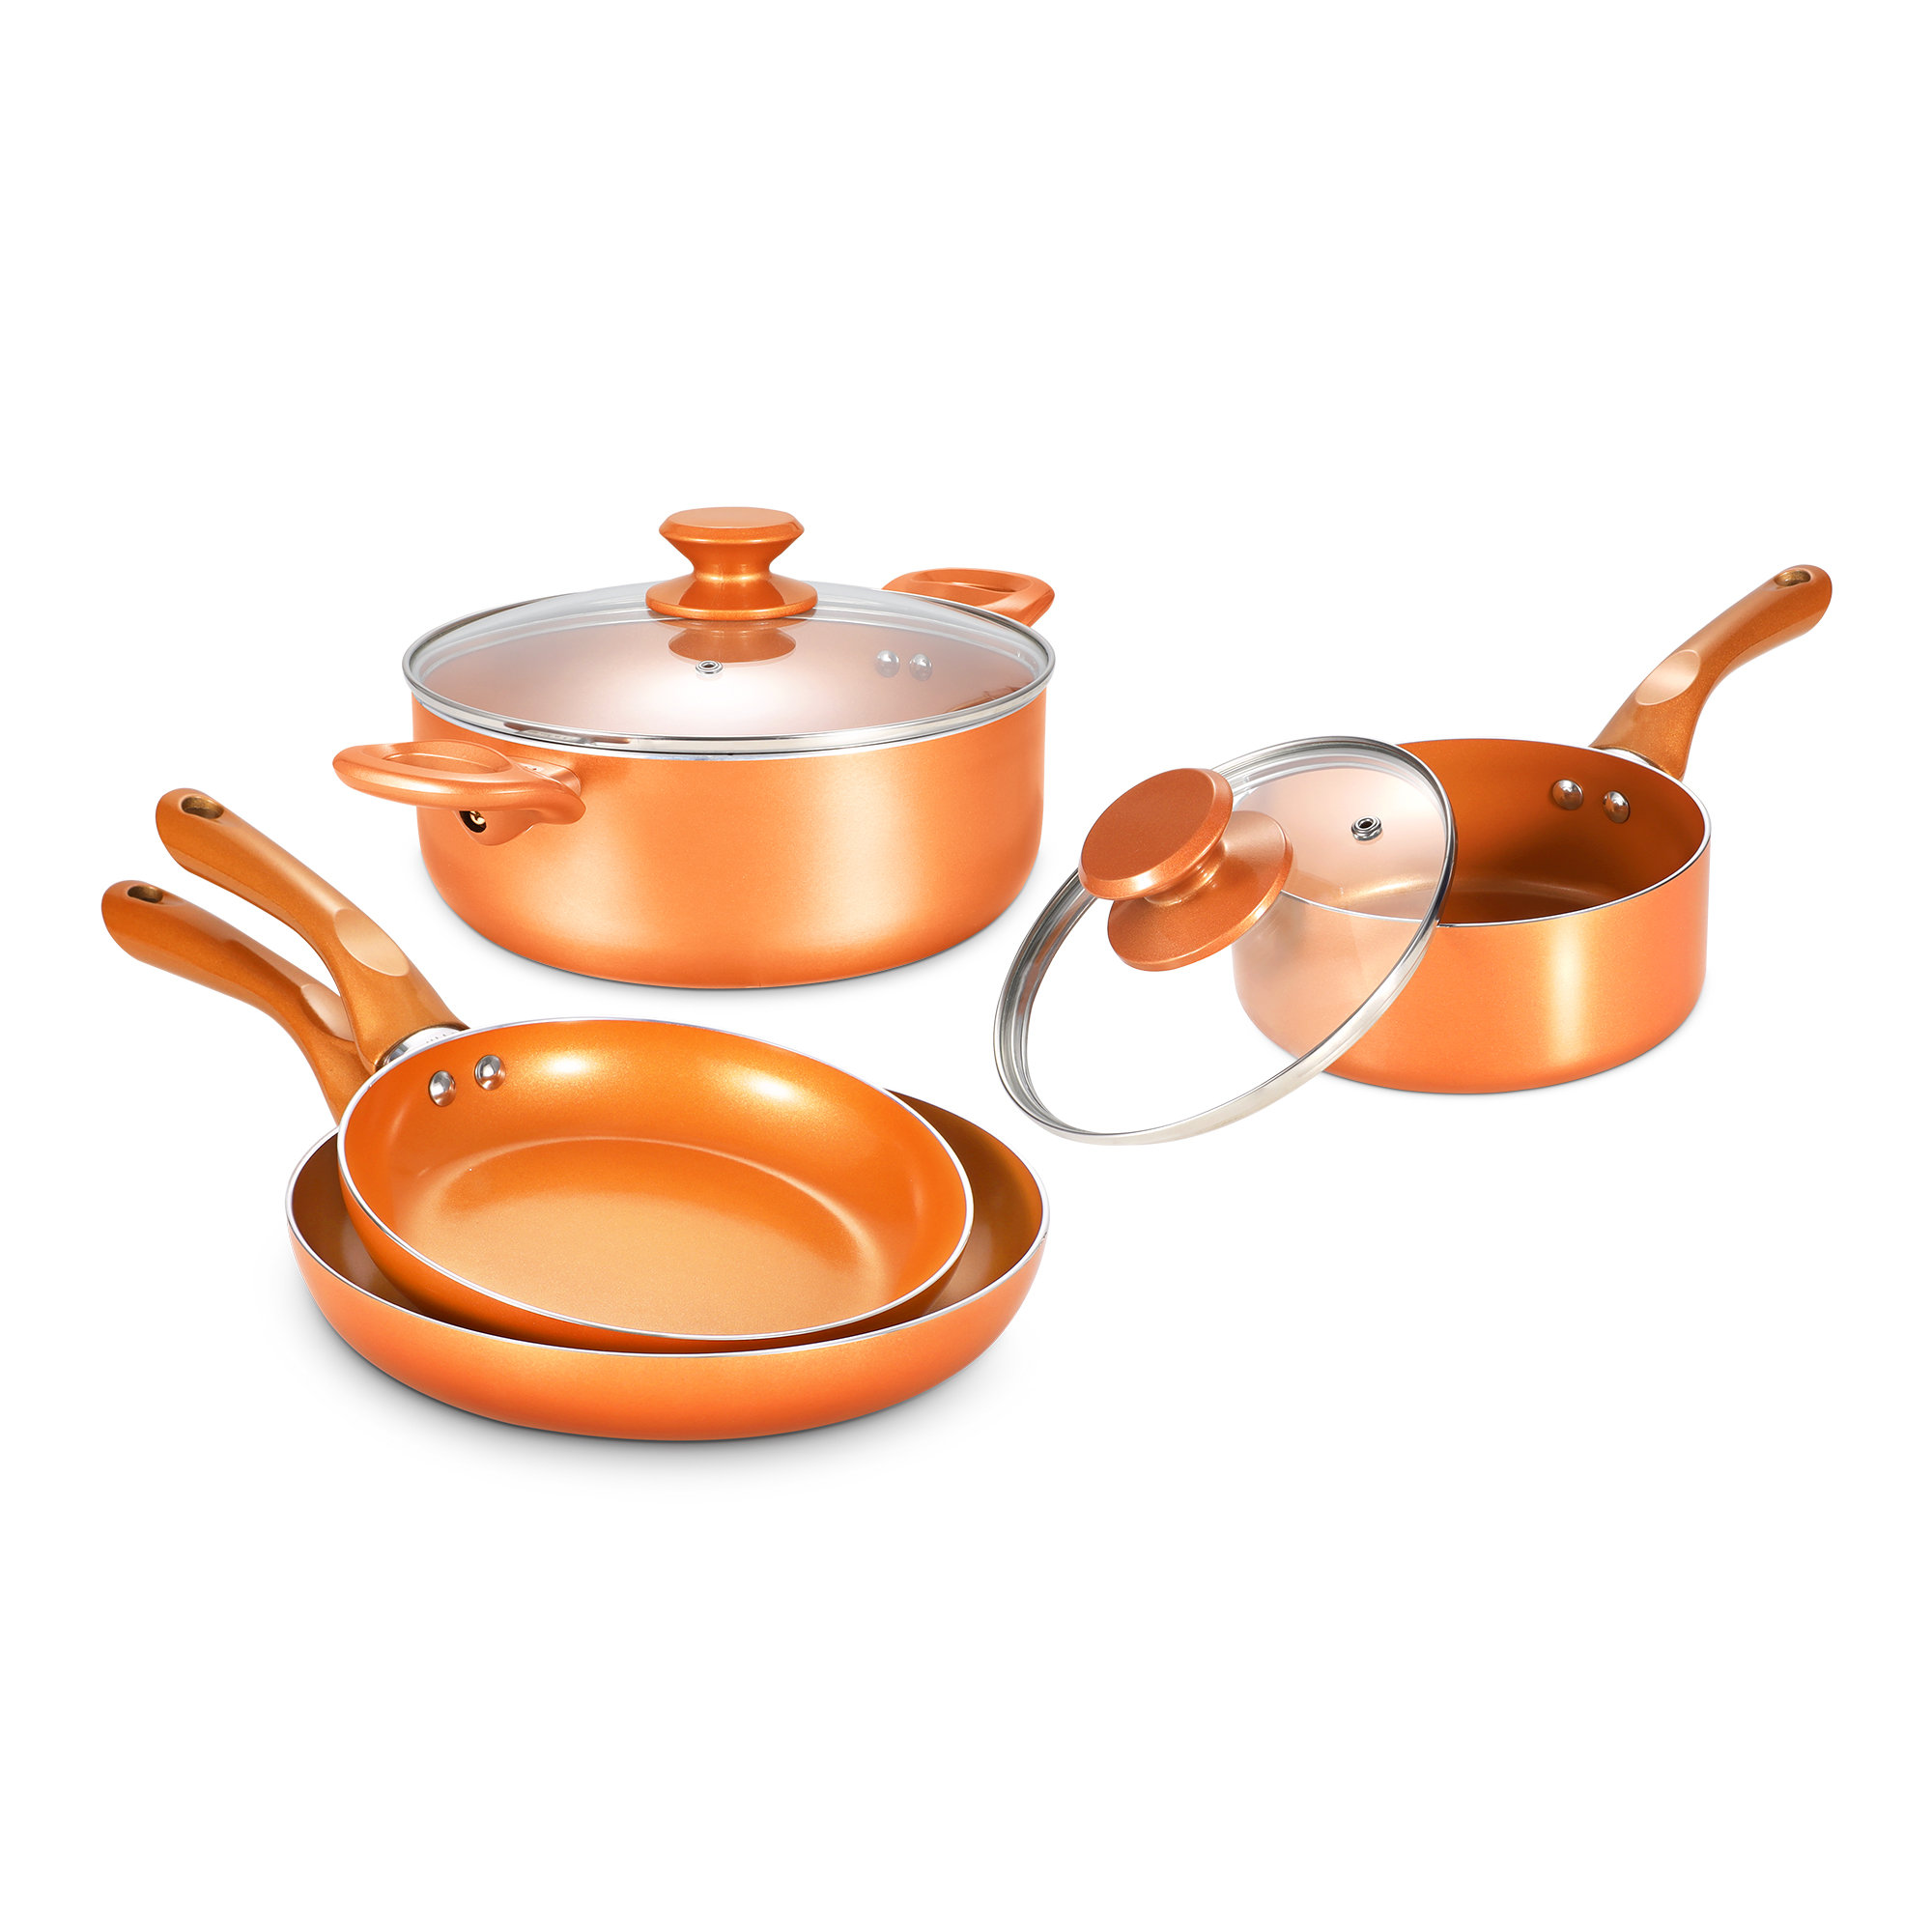 6 Pieces Aluminum Nonstick Cookware Set with Lids and Flame